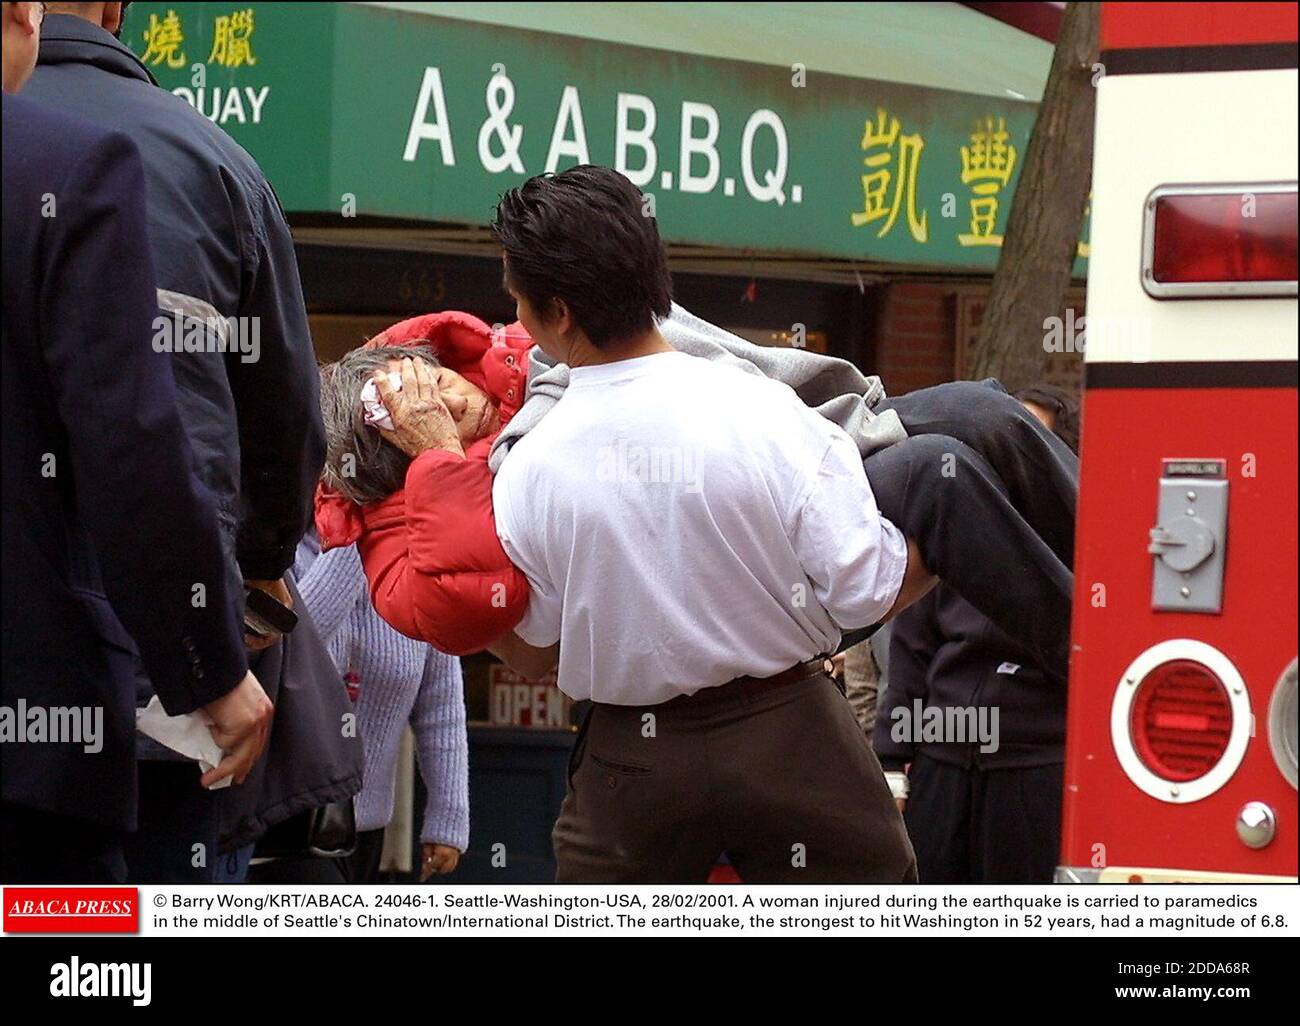 NO FILM, NO VIDEO, NO TV, NO DOCUMENTARY - © Barry Wong/KRT/ABACA. 24046-1. Seattle-Washington-USA, 28/02/2001. A woman injured during the earthquake is carried to paramedics in the middle of Seattle's Chinatown/International District. The earthquake, the strongest to hit Washington in 52 years, h Stock Photo